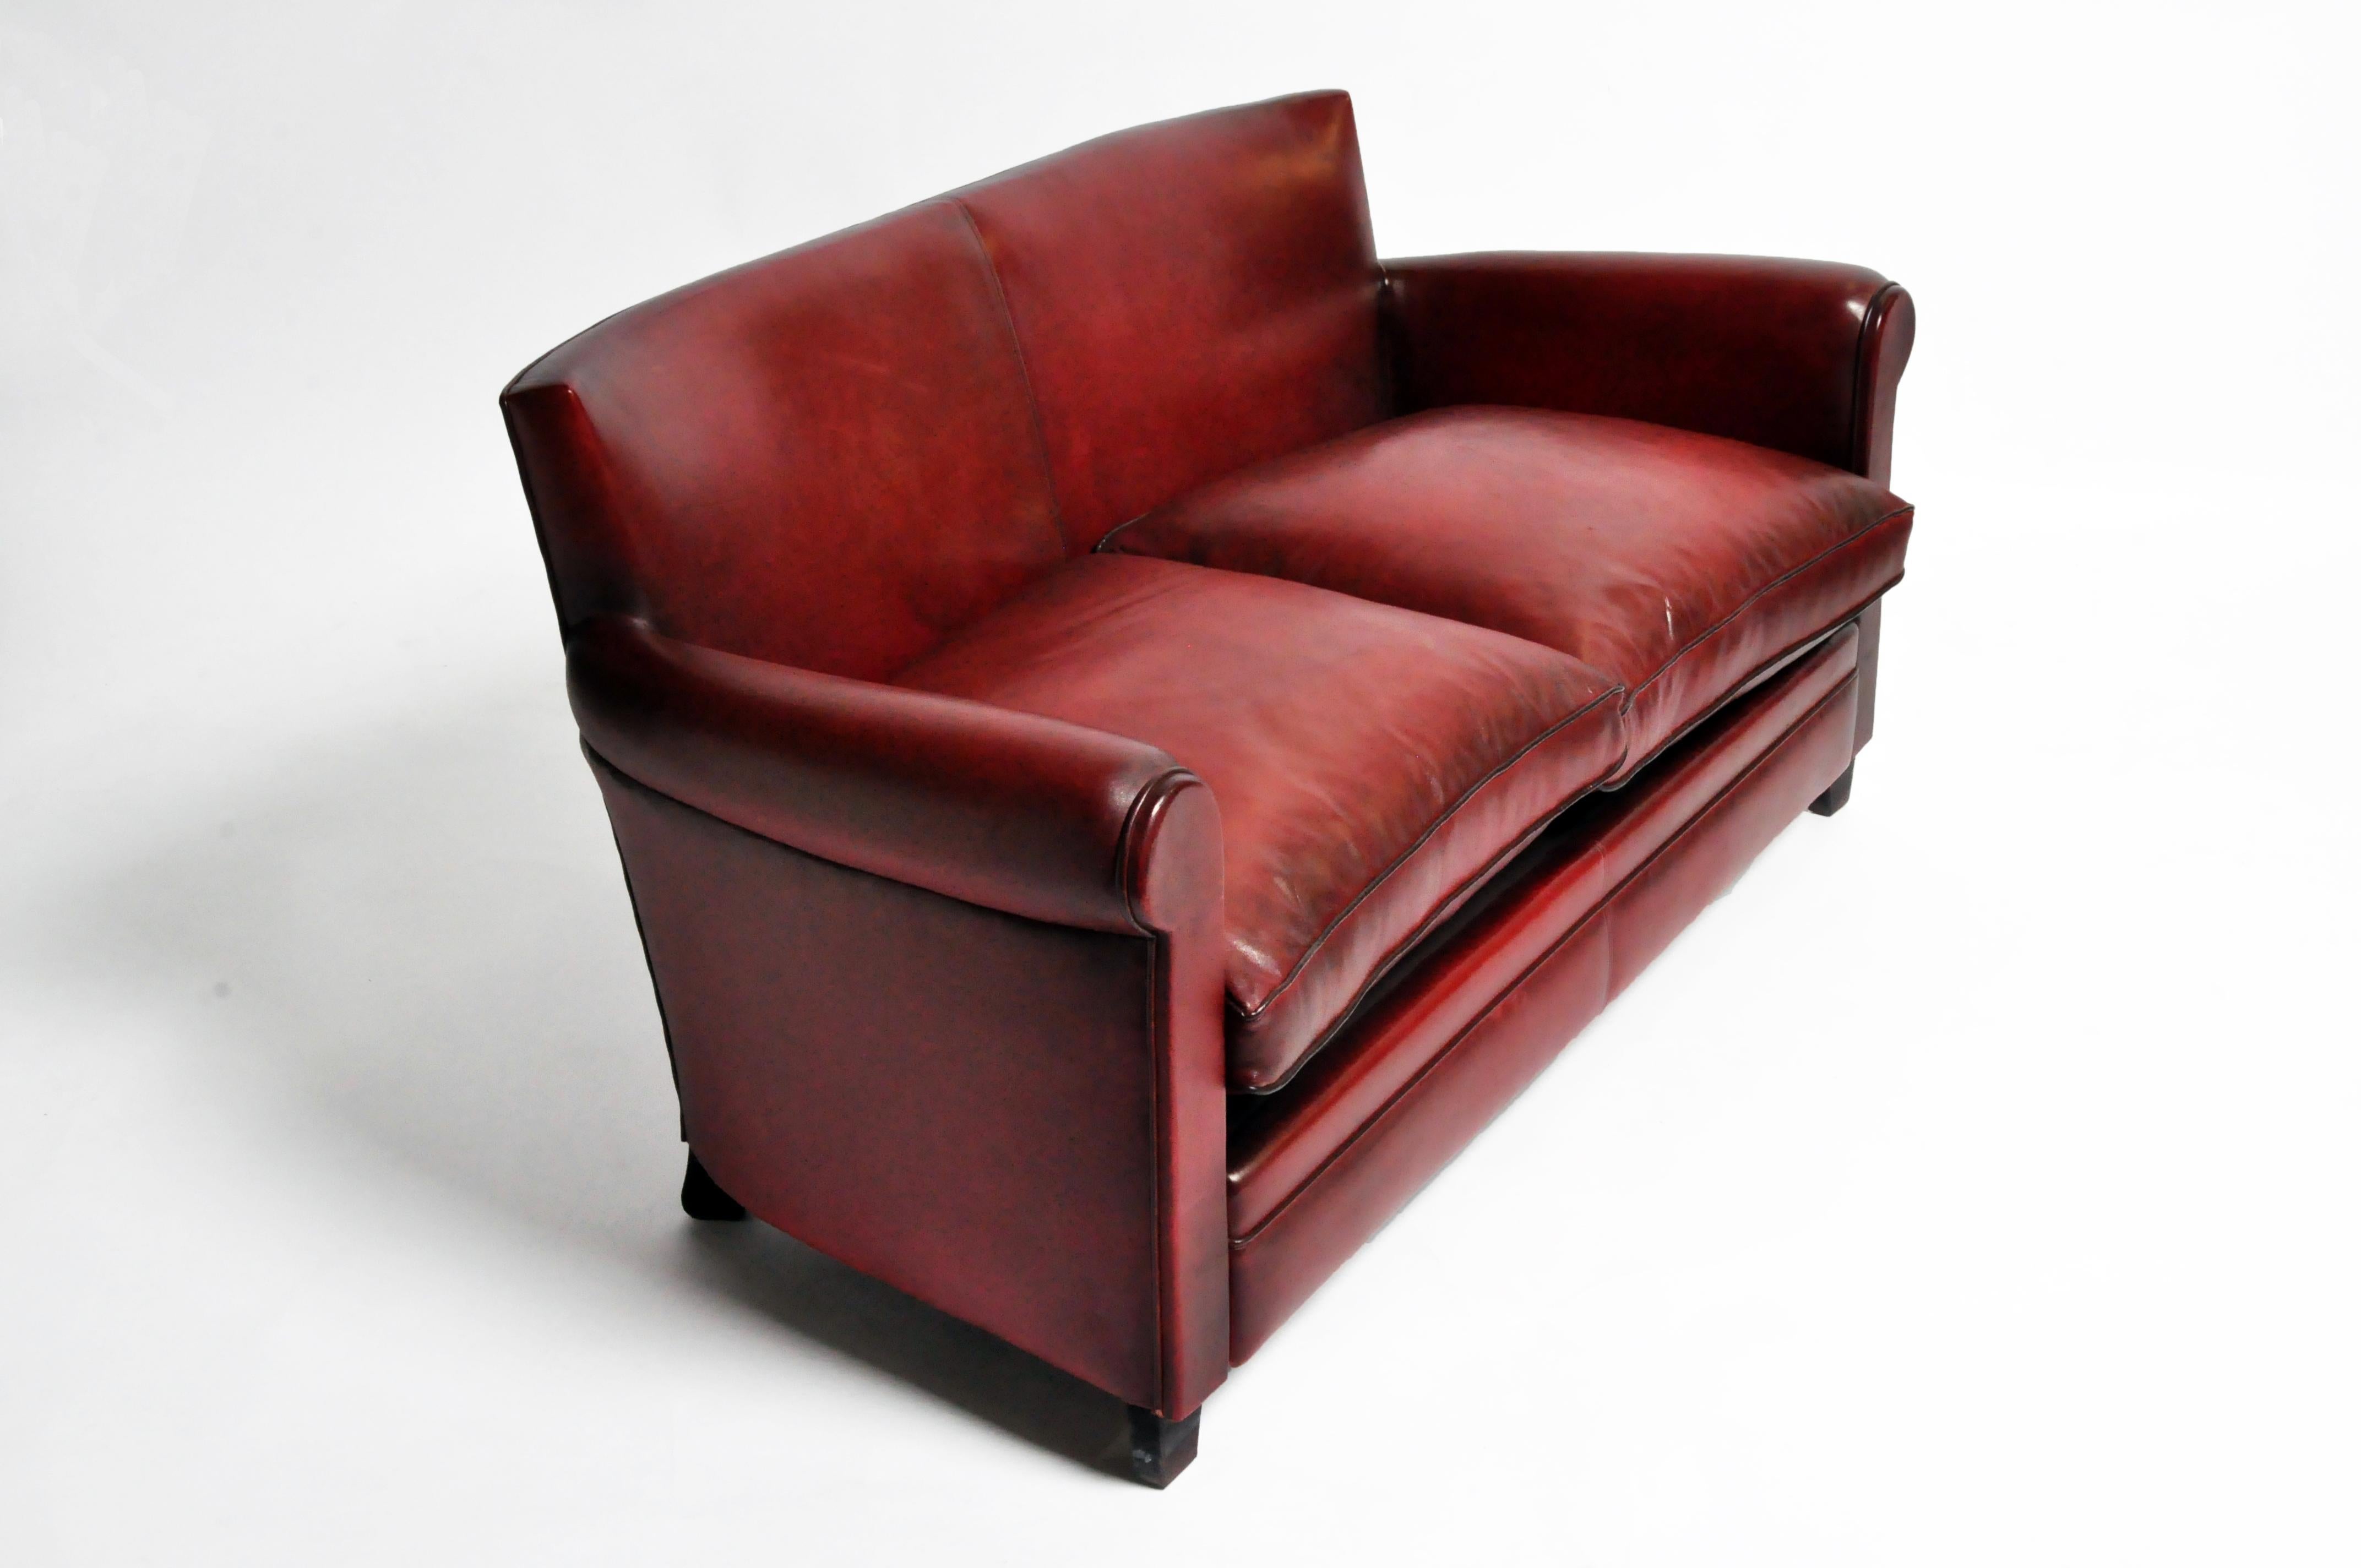 This intimate leather sofa (or loveseat) is newly made in a small atelier near Paris. It is comfortable, sturdy and the lamb leather is unusually soft and supple.